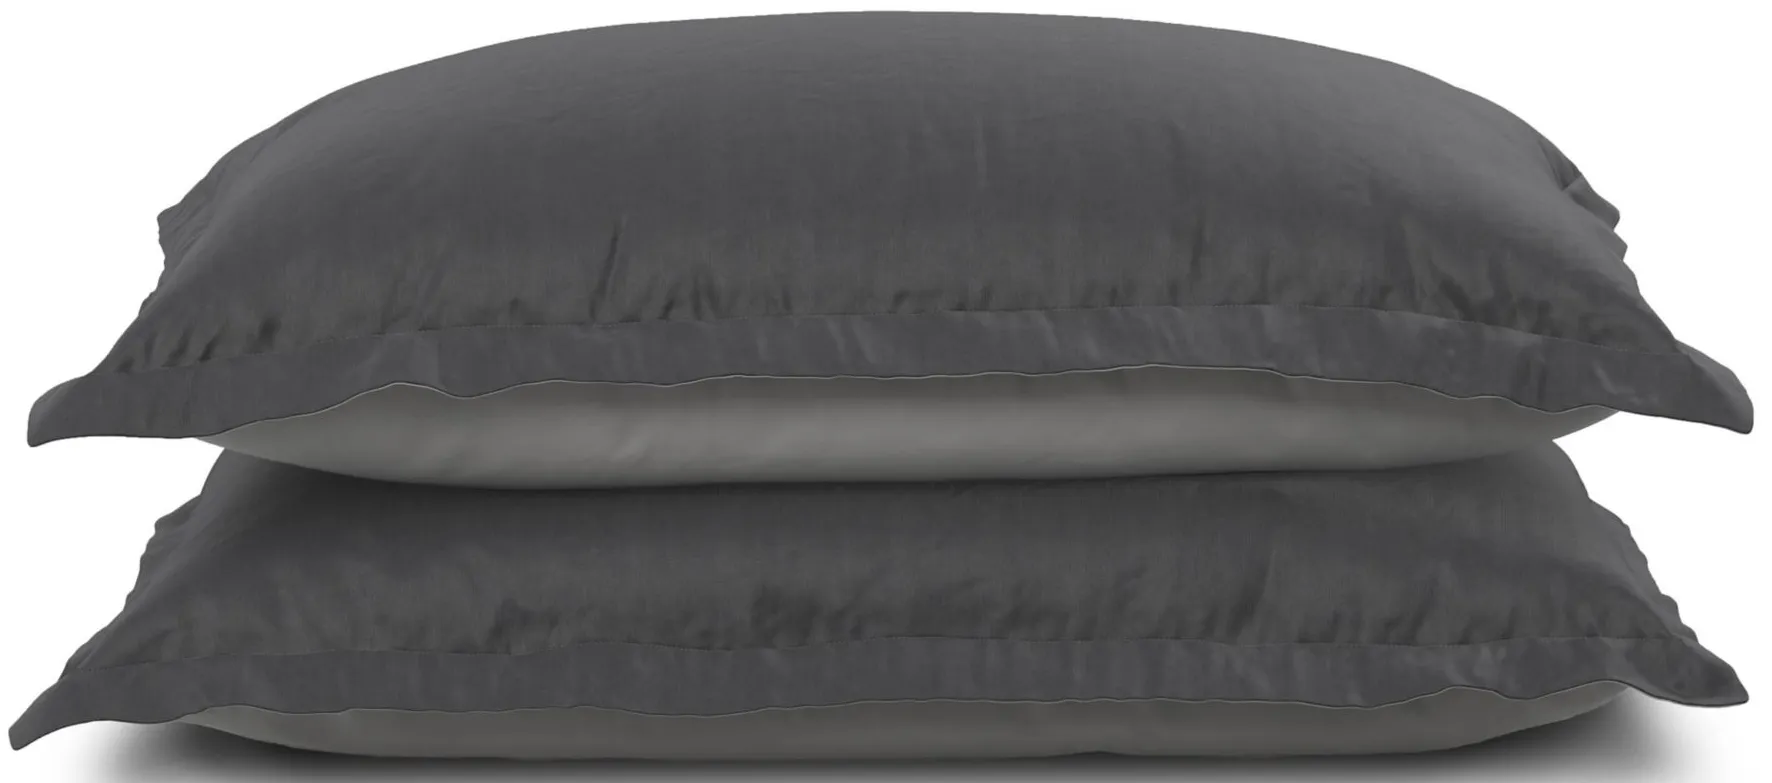 PureCare Dual-Sided Pillow Sham Set - Cooling + Bamboo in Shadow / Dove Gray by PureCare